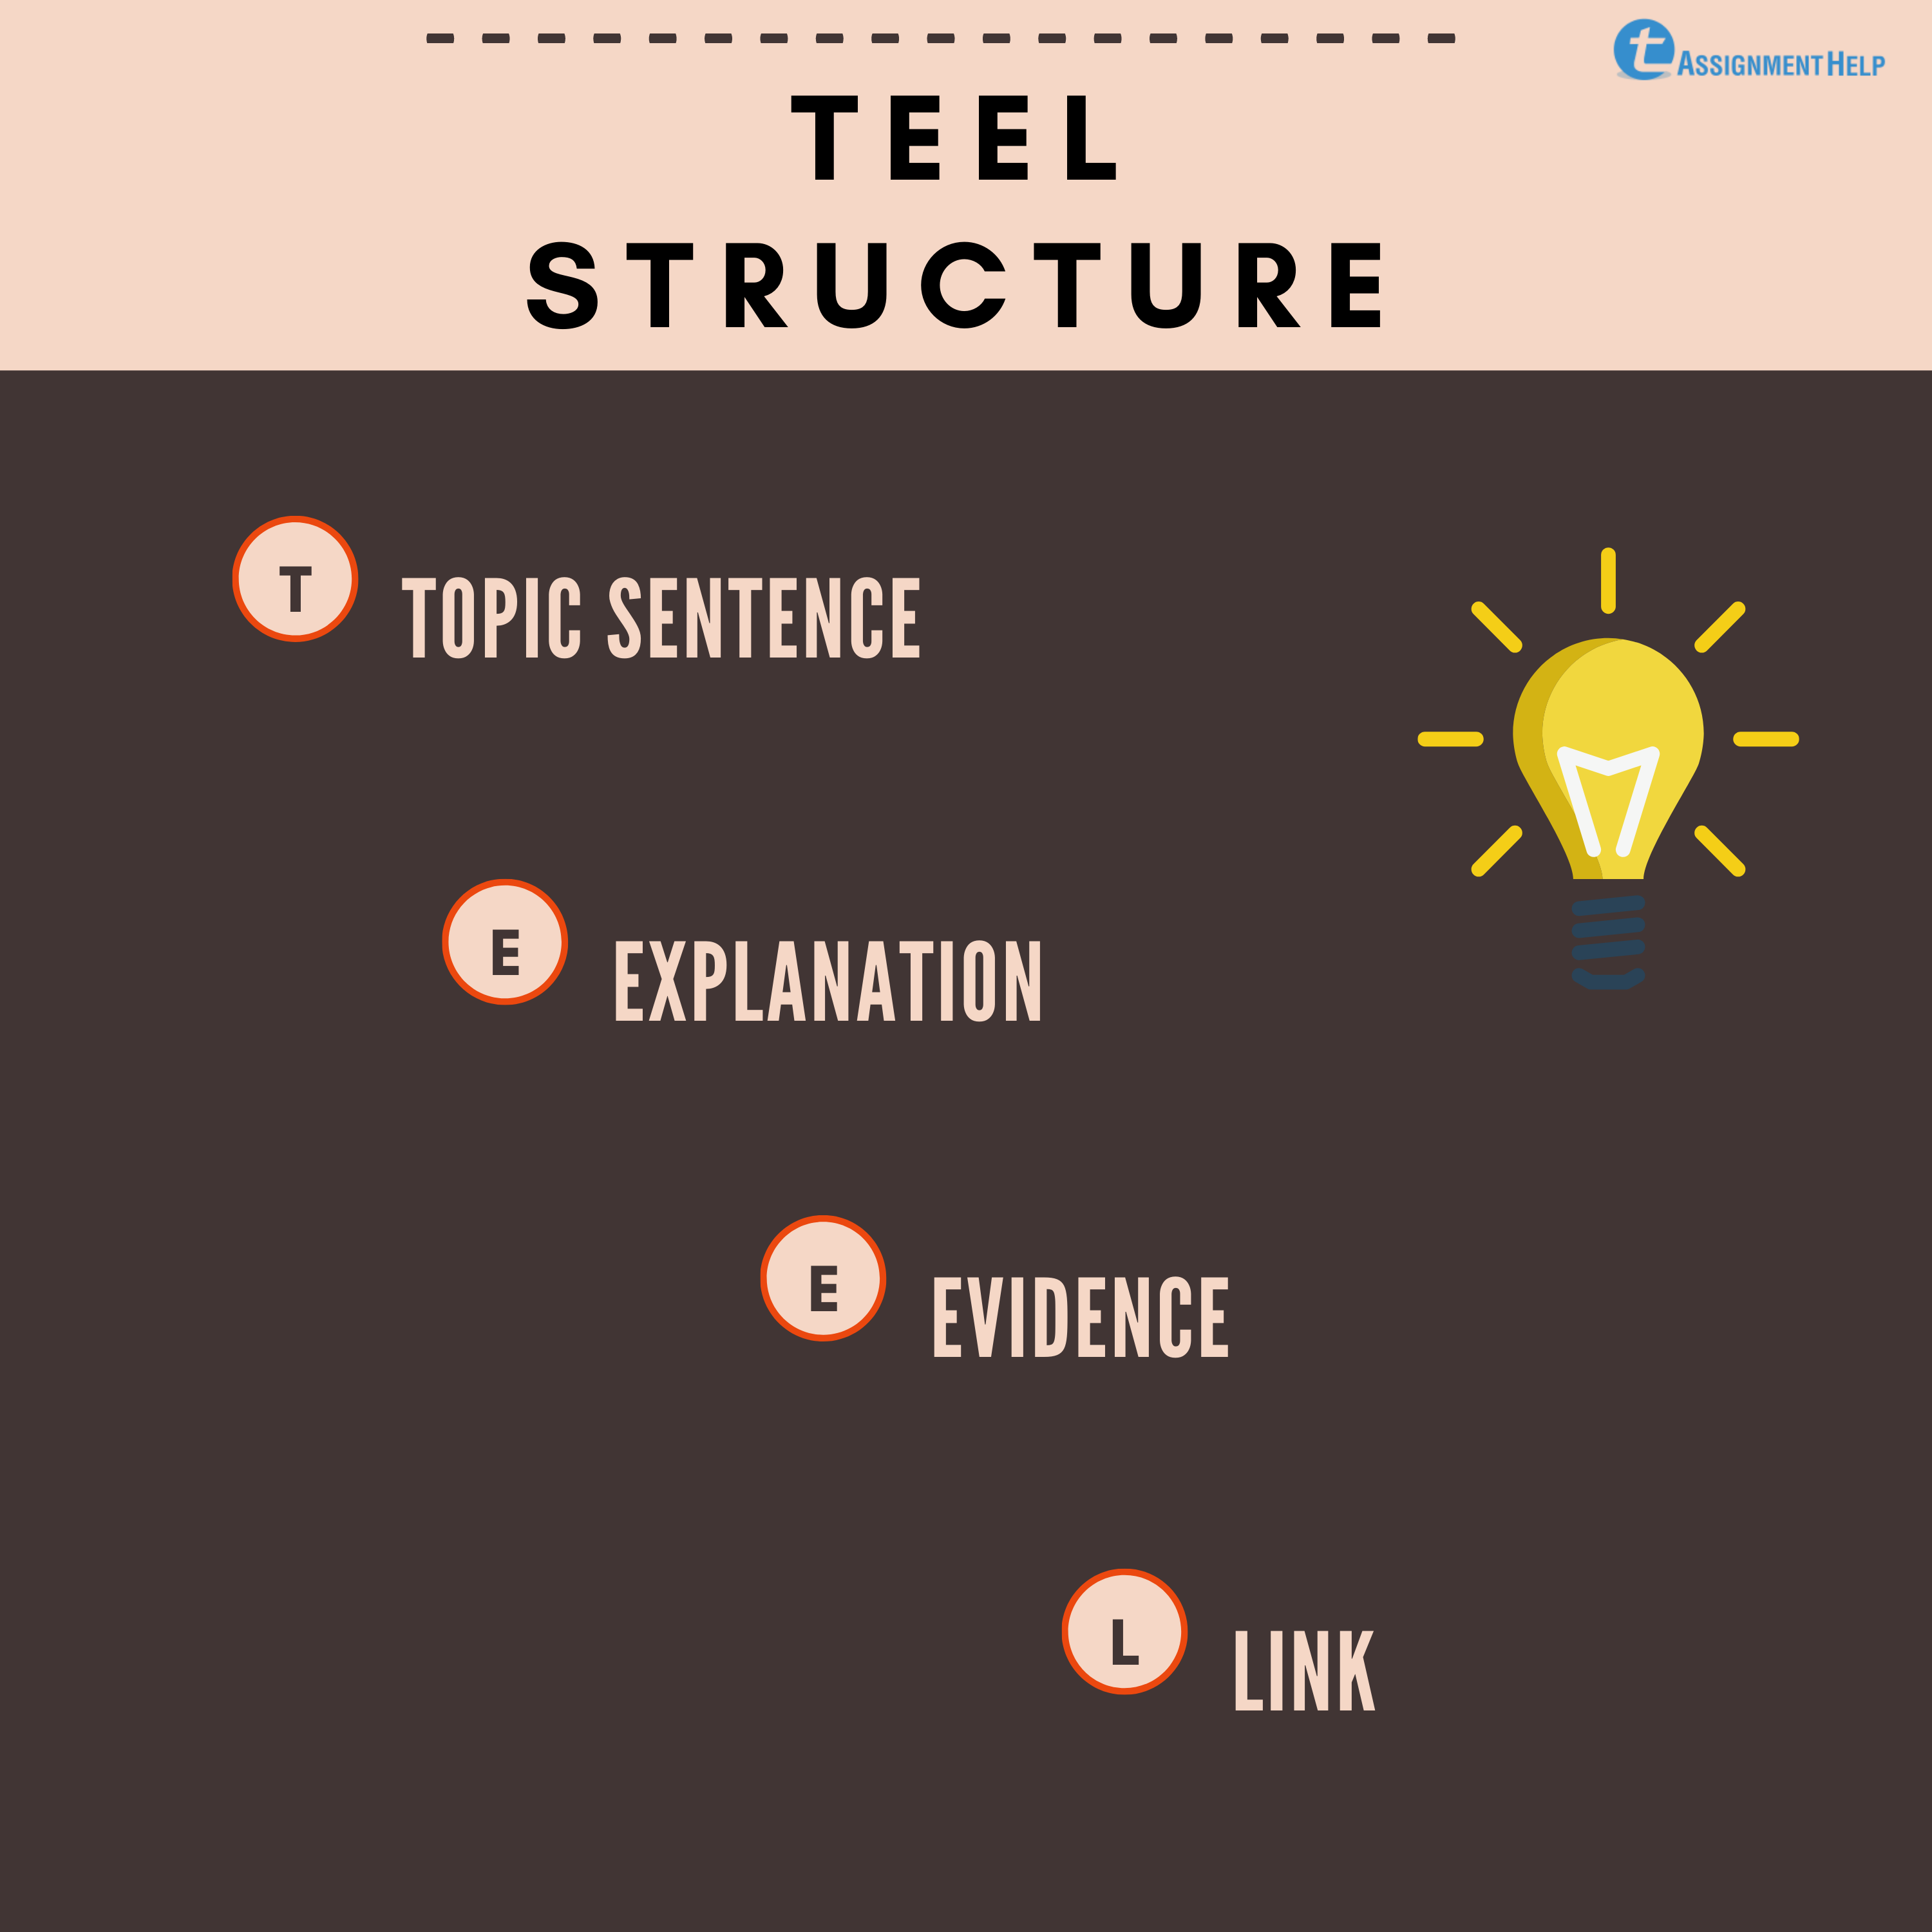 how to write a teel essay introduction